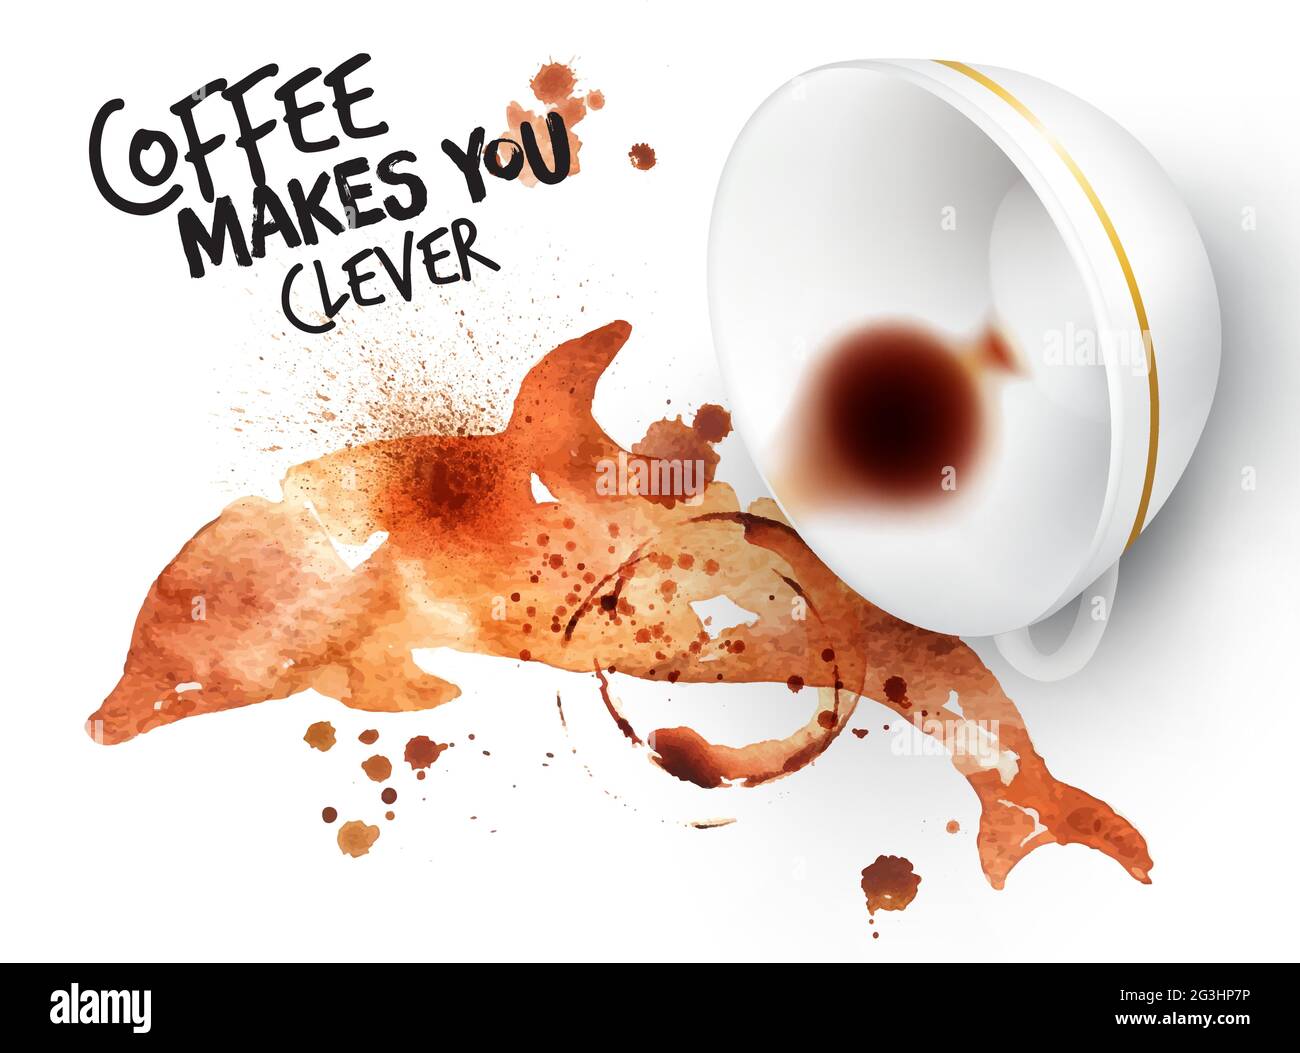 Poster drawn coffee imprint of dolphin and inverted cup with spilled coffee, lettering coffee makes you clever. Stock Vector